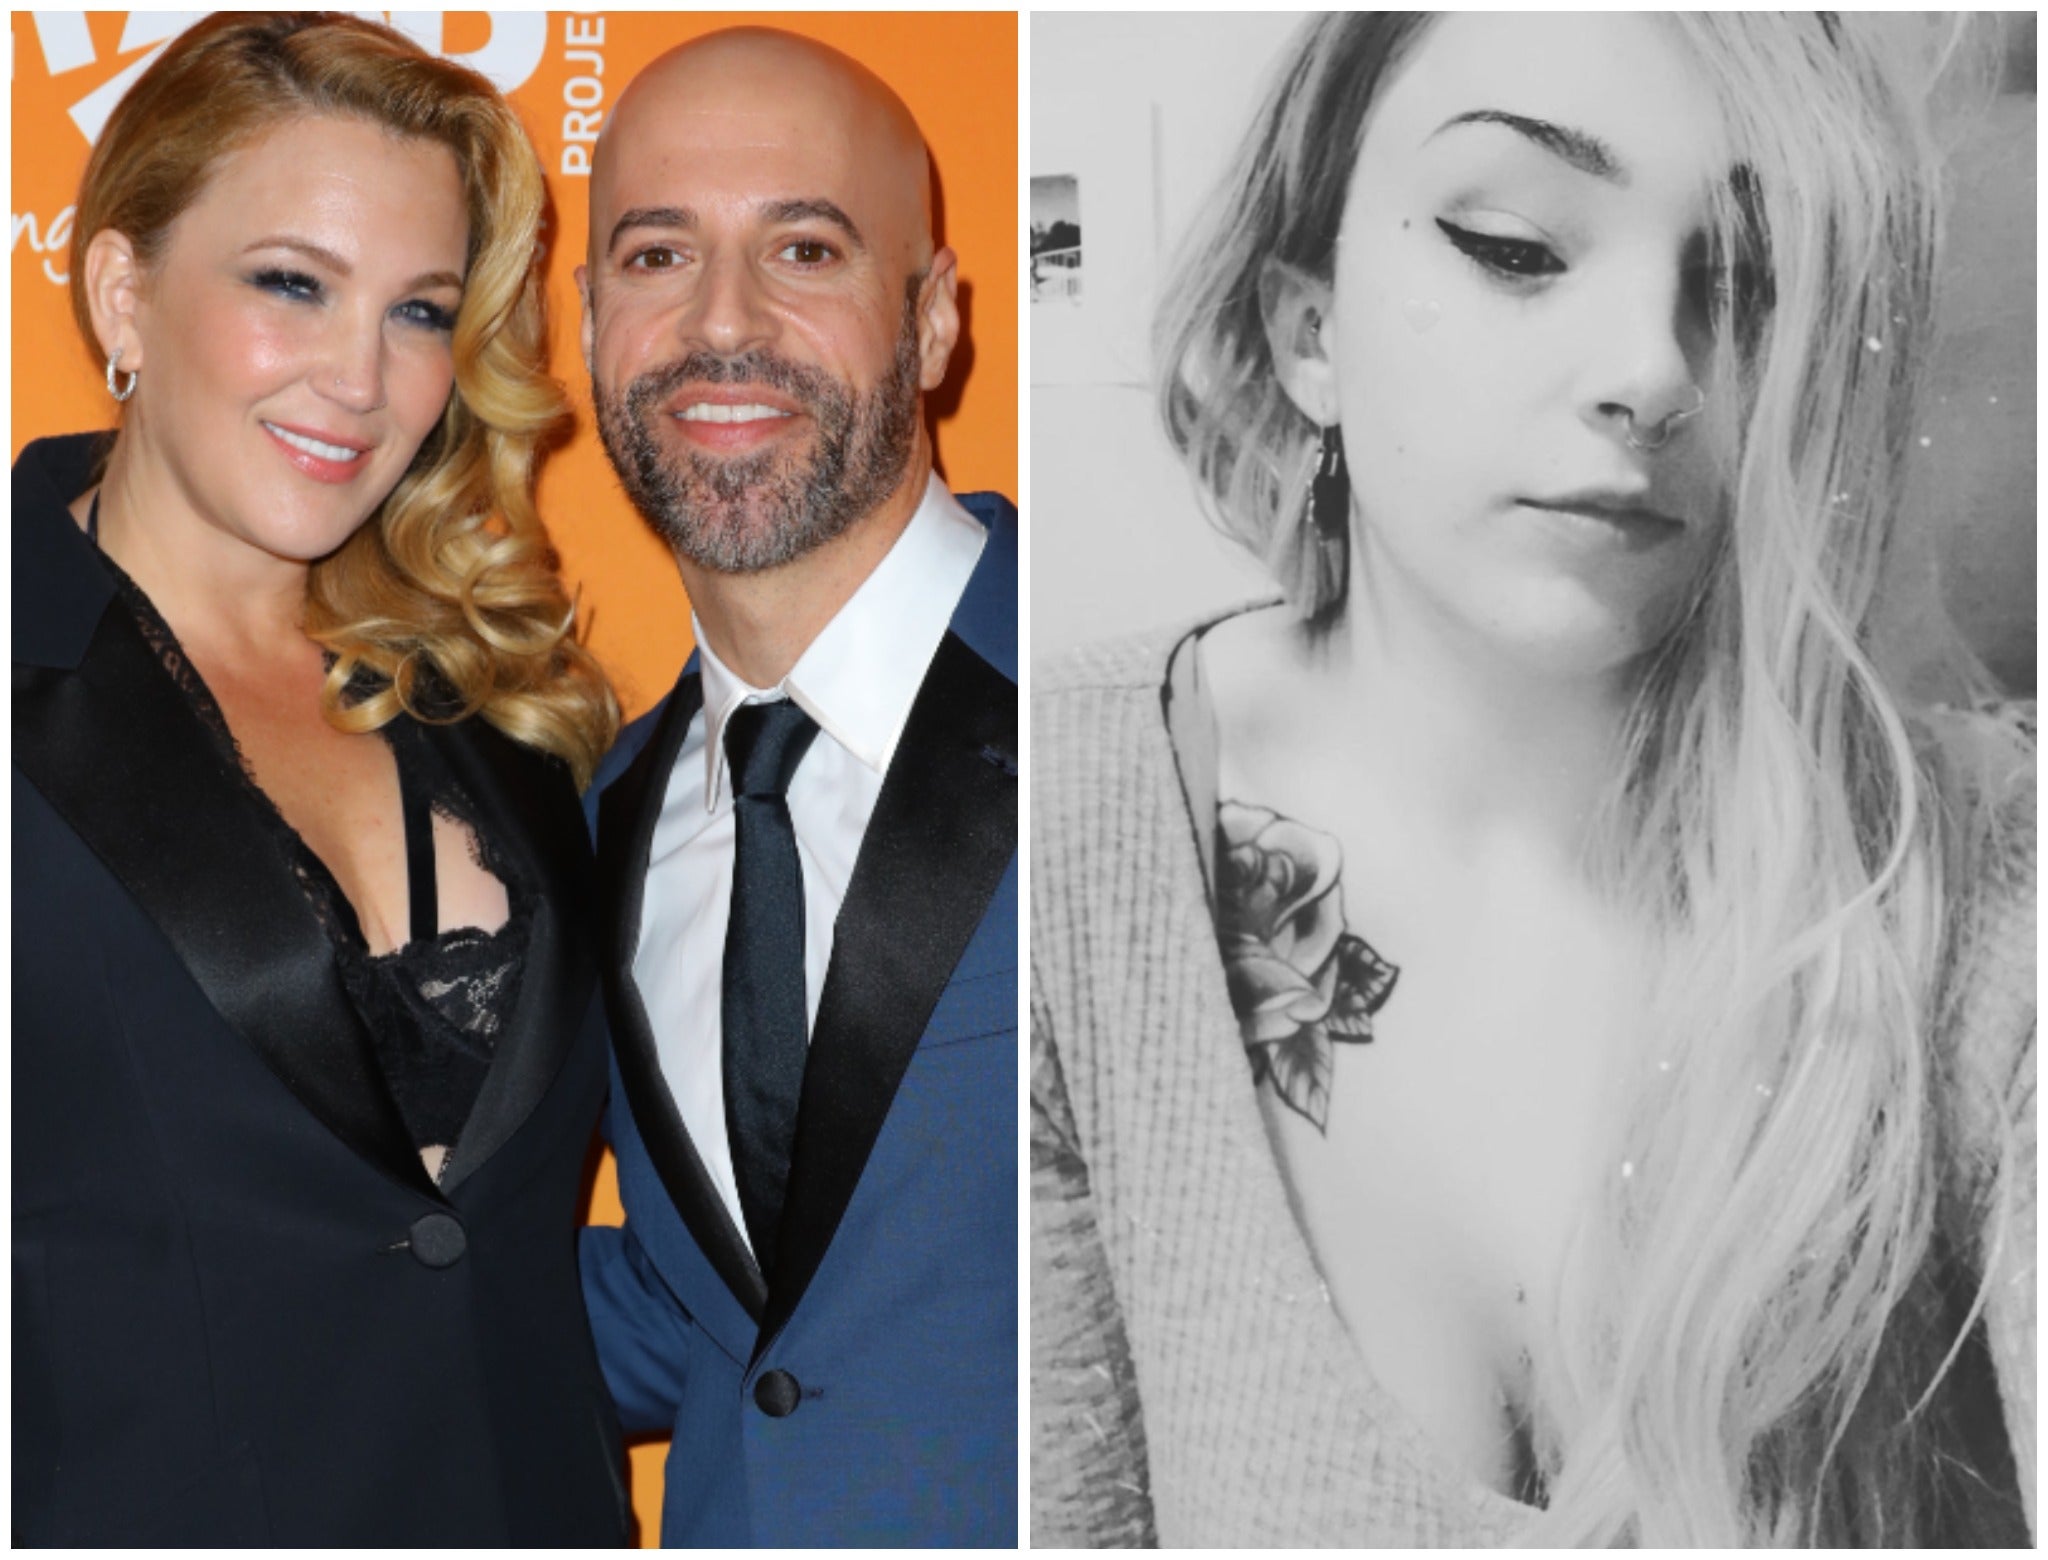 Deanna and Chris Daughtry, left, have asked for privacy after the death of their daughter, Hannah